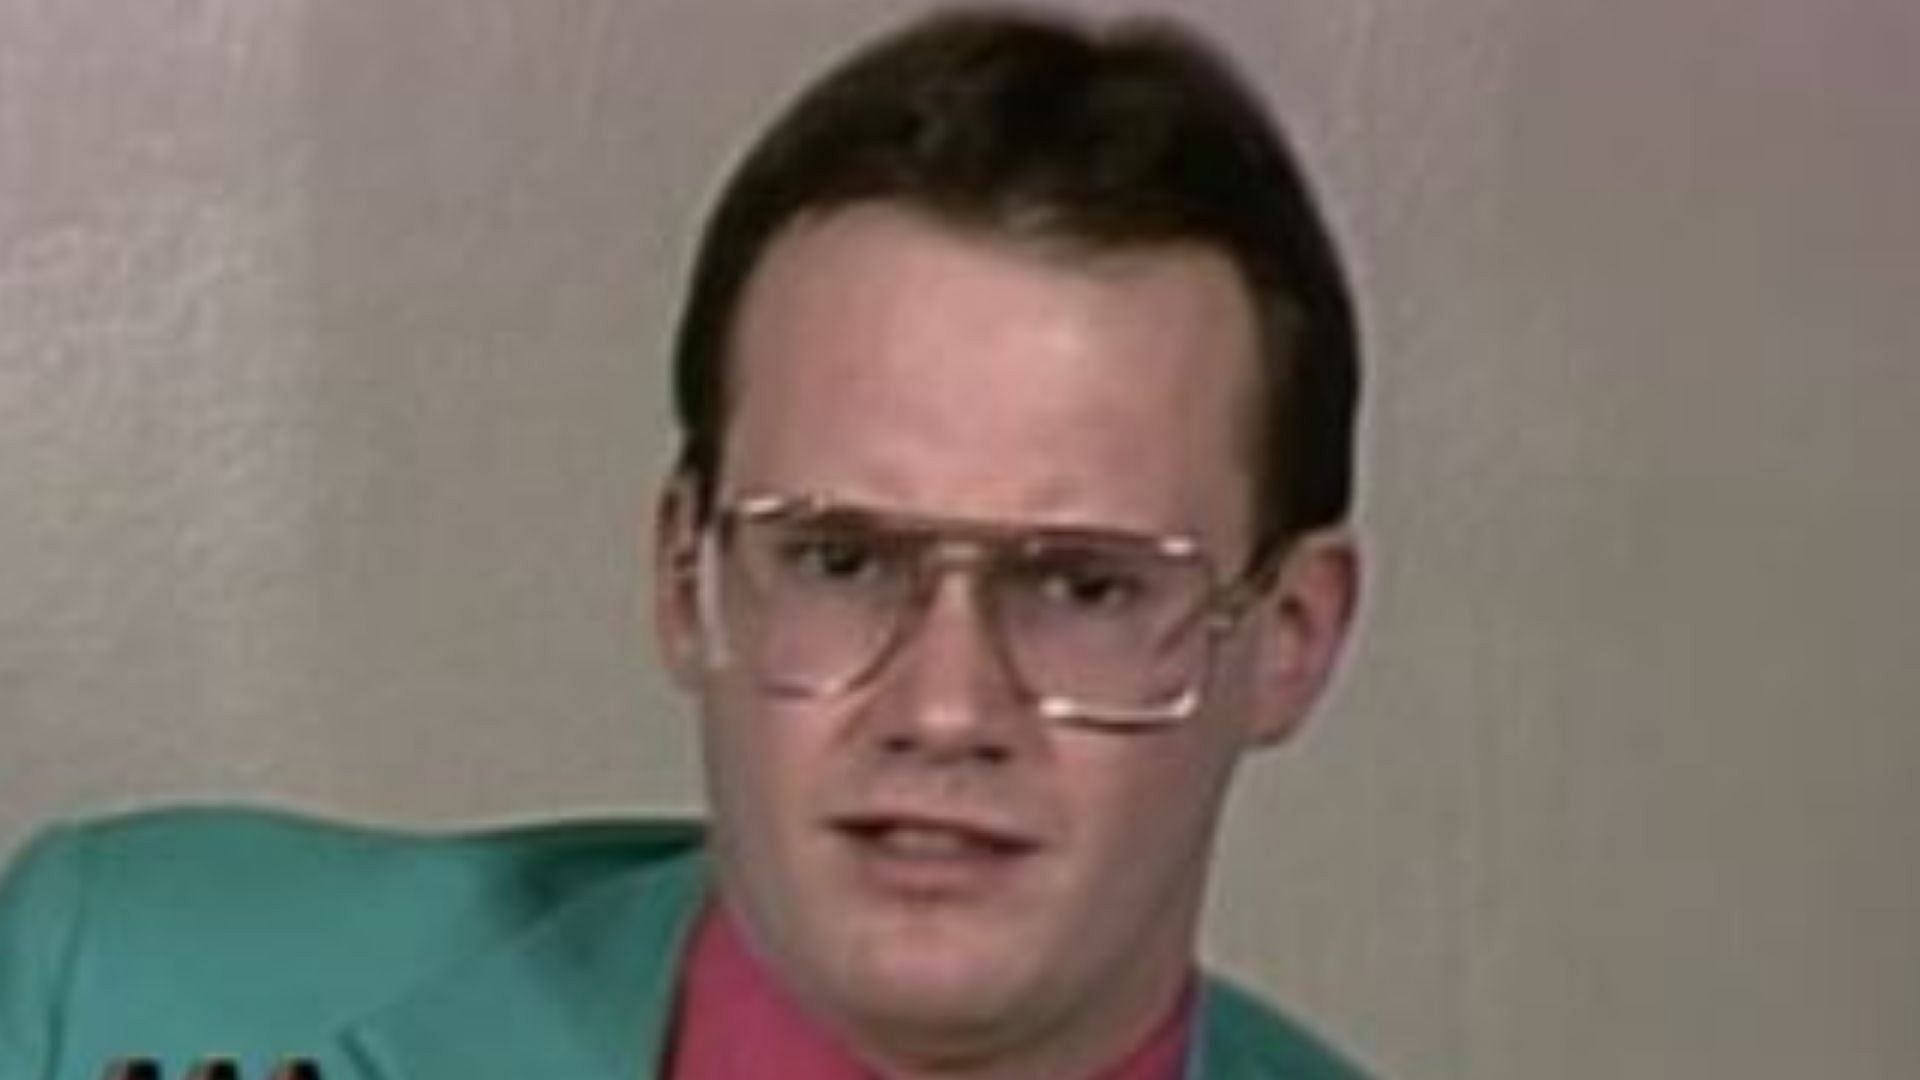 Jim Cornette during a segment for WCW in 1989